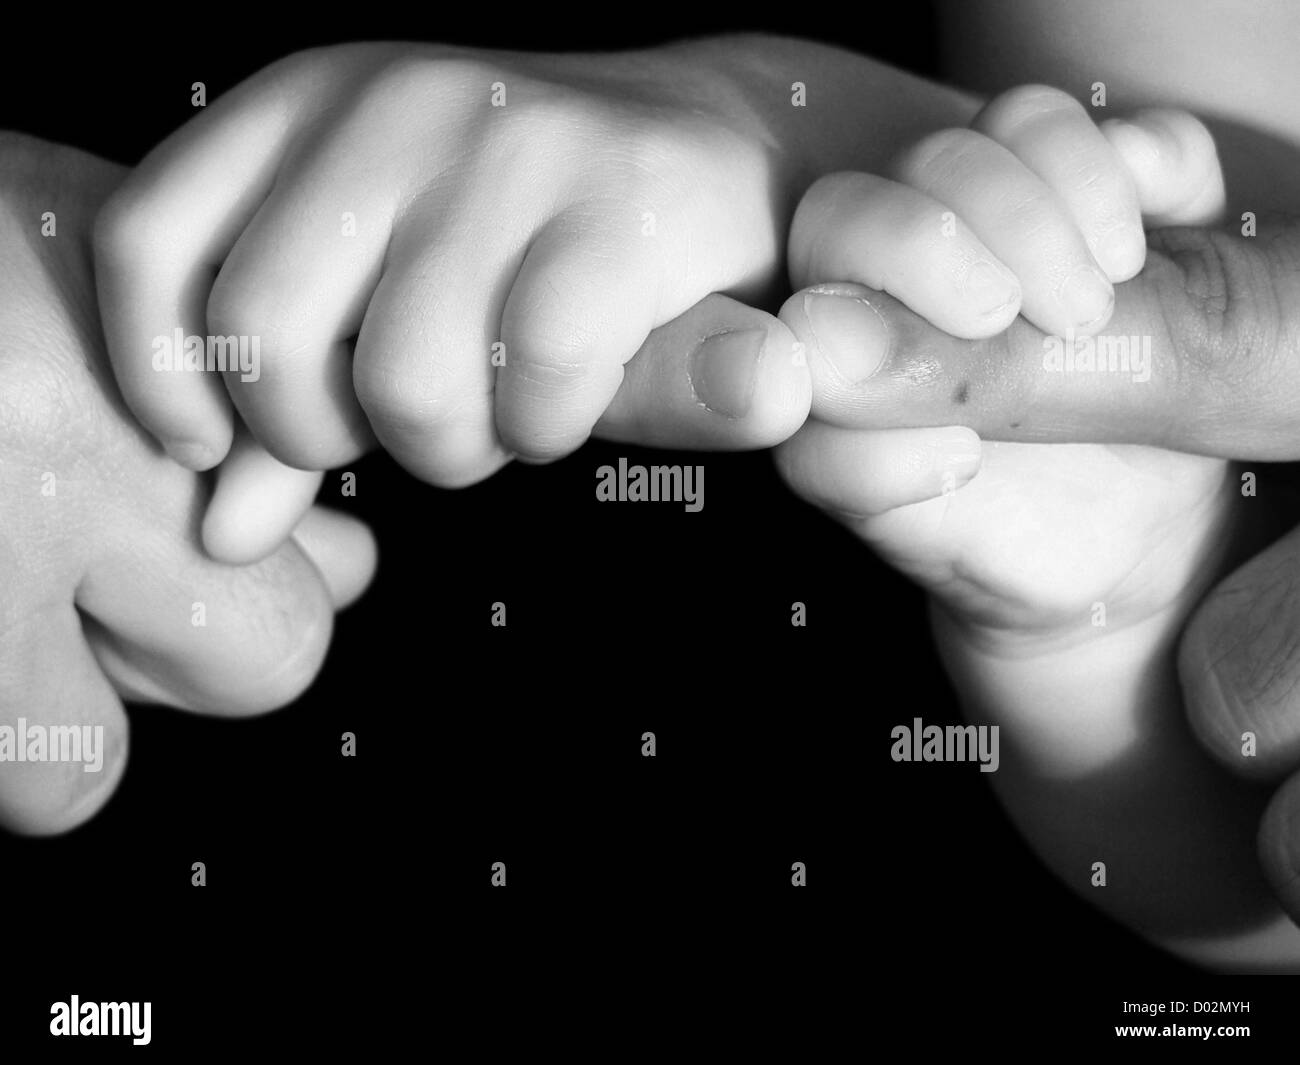 Family Hands Father and child's interlocked hands in black and white Stock Photo